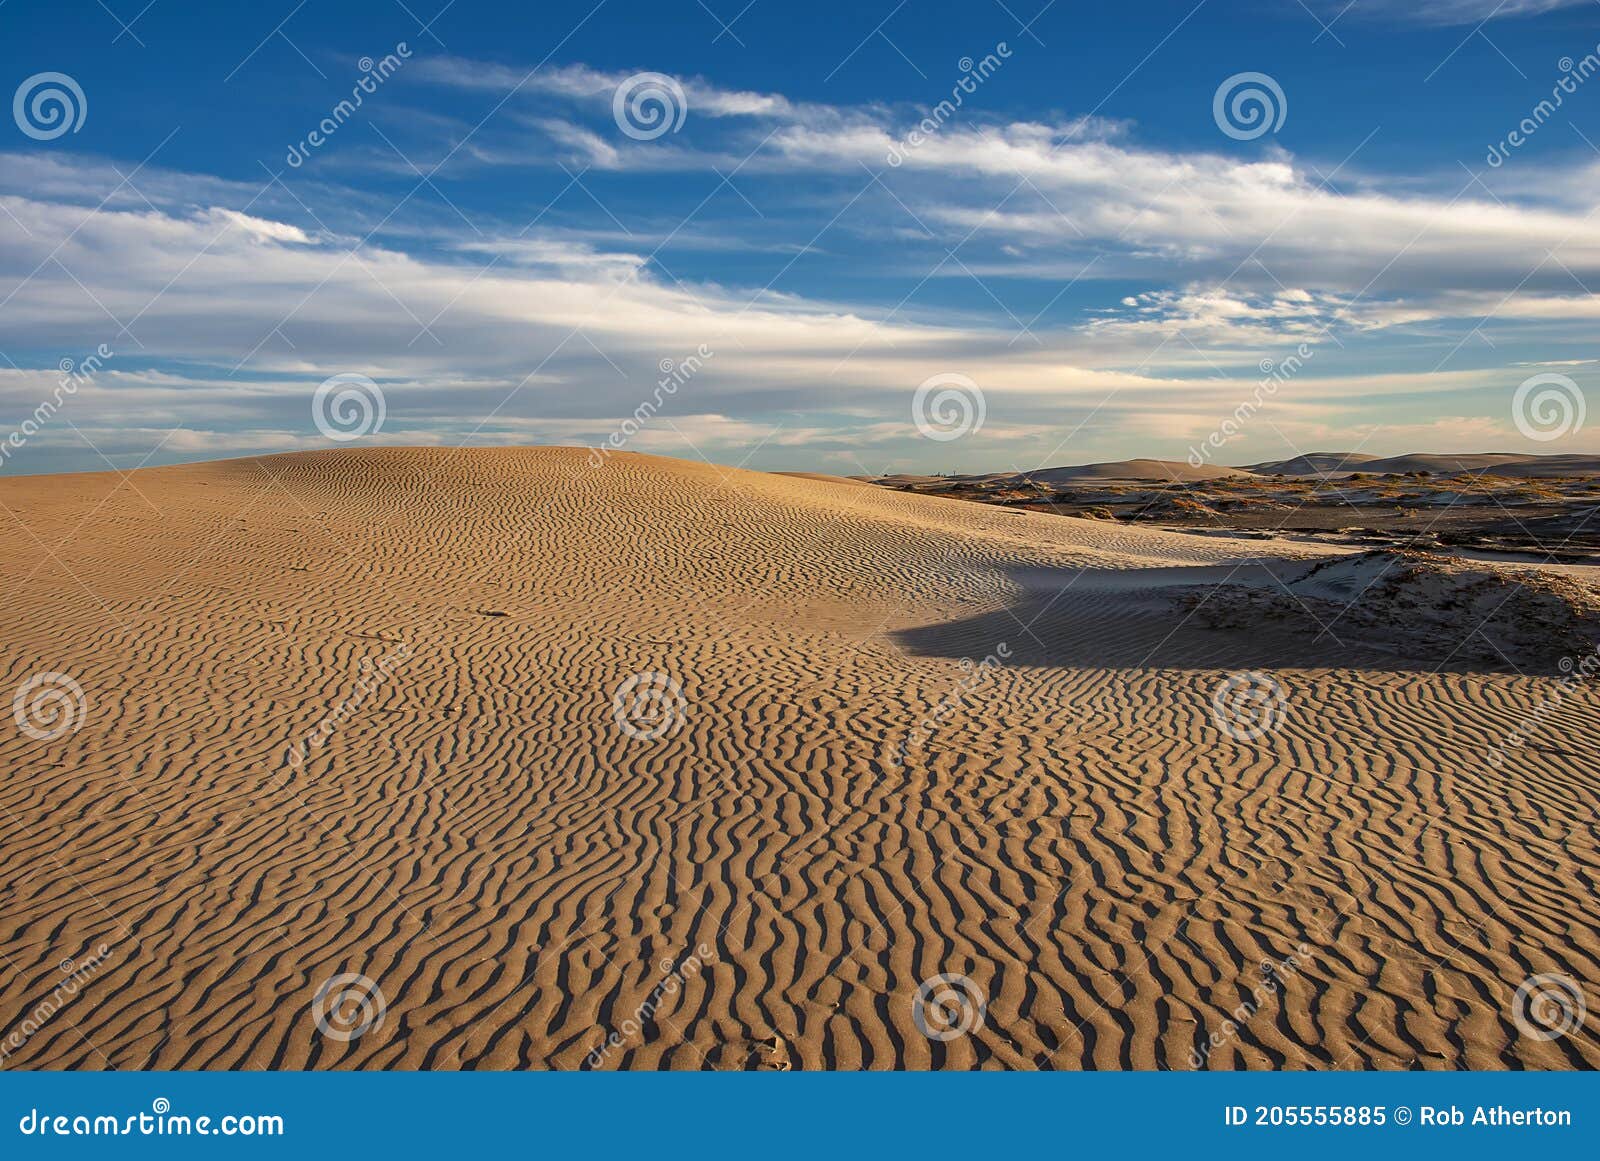 the late afternoon sun casts shadows across the sand dunes at adolfo lopez mateos in baja california